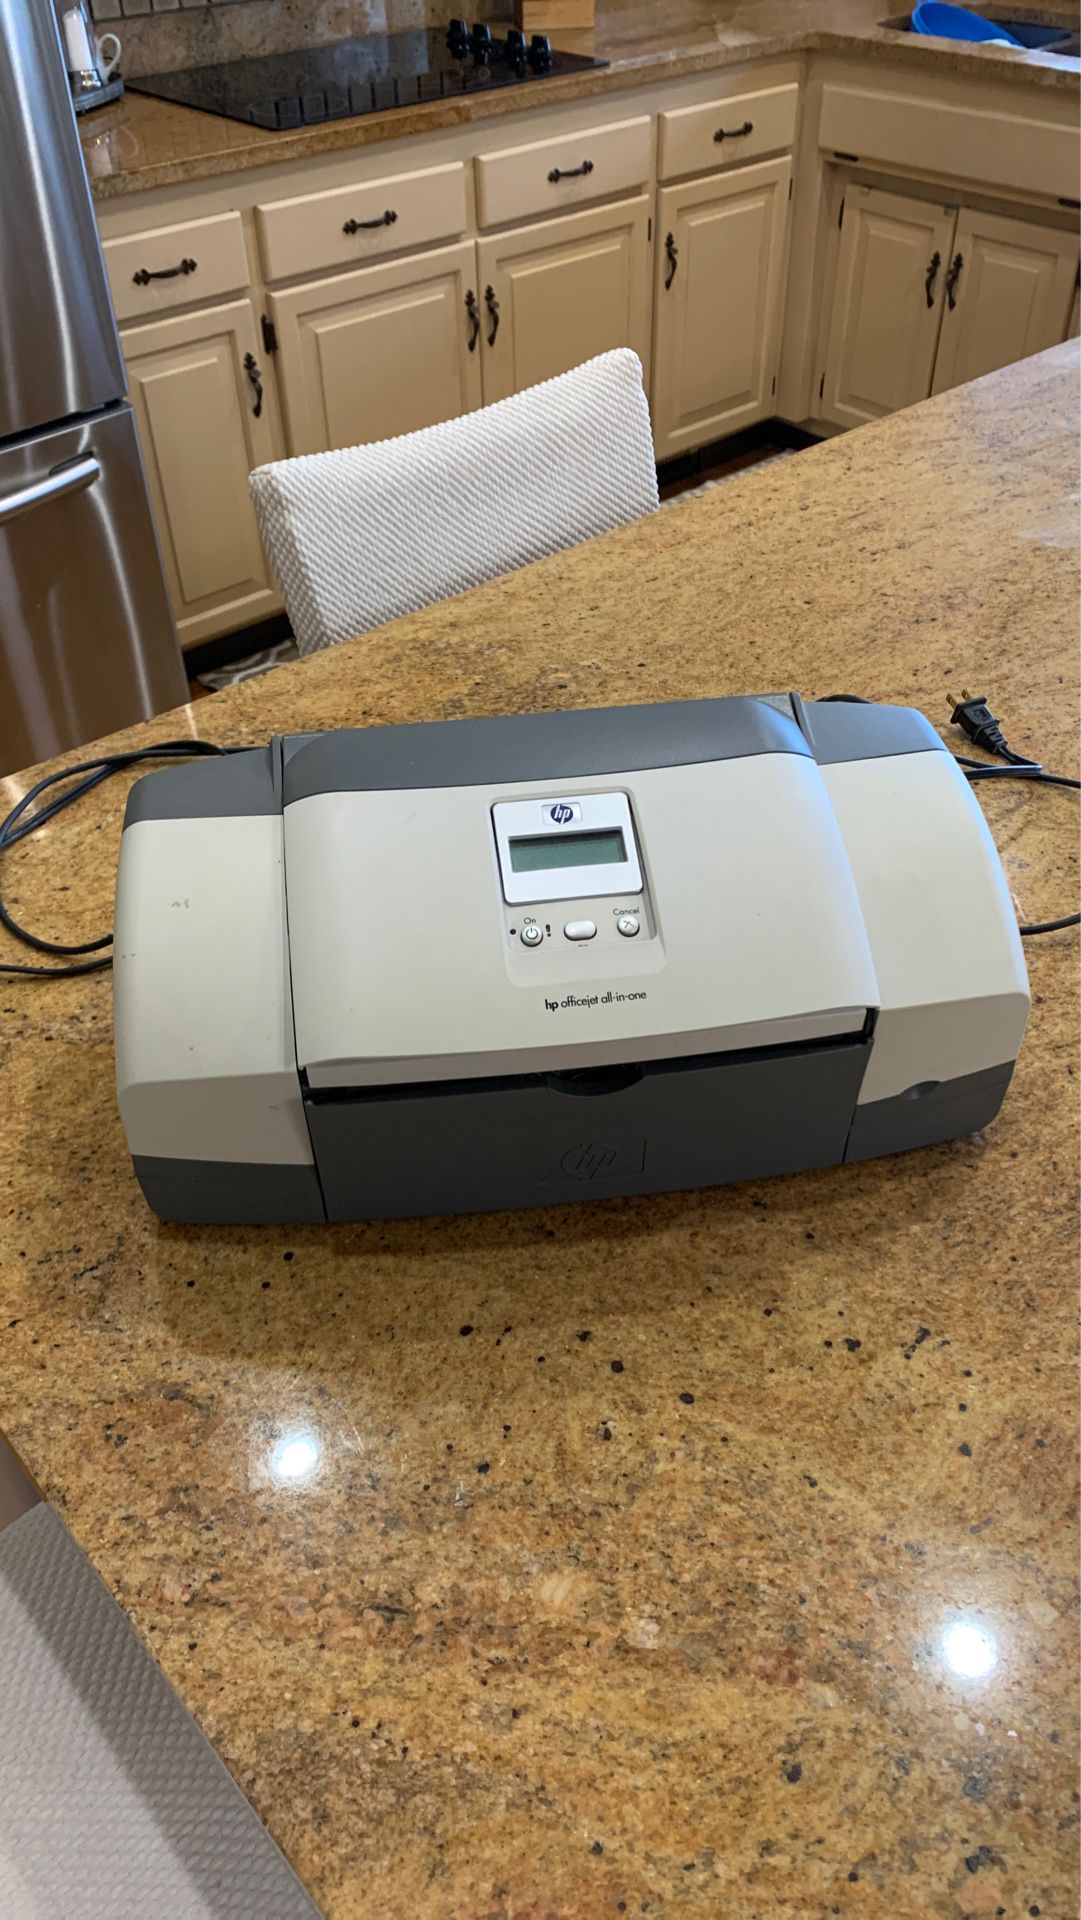 How office jet all in one printer scanner fax.